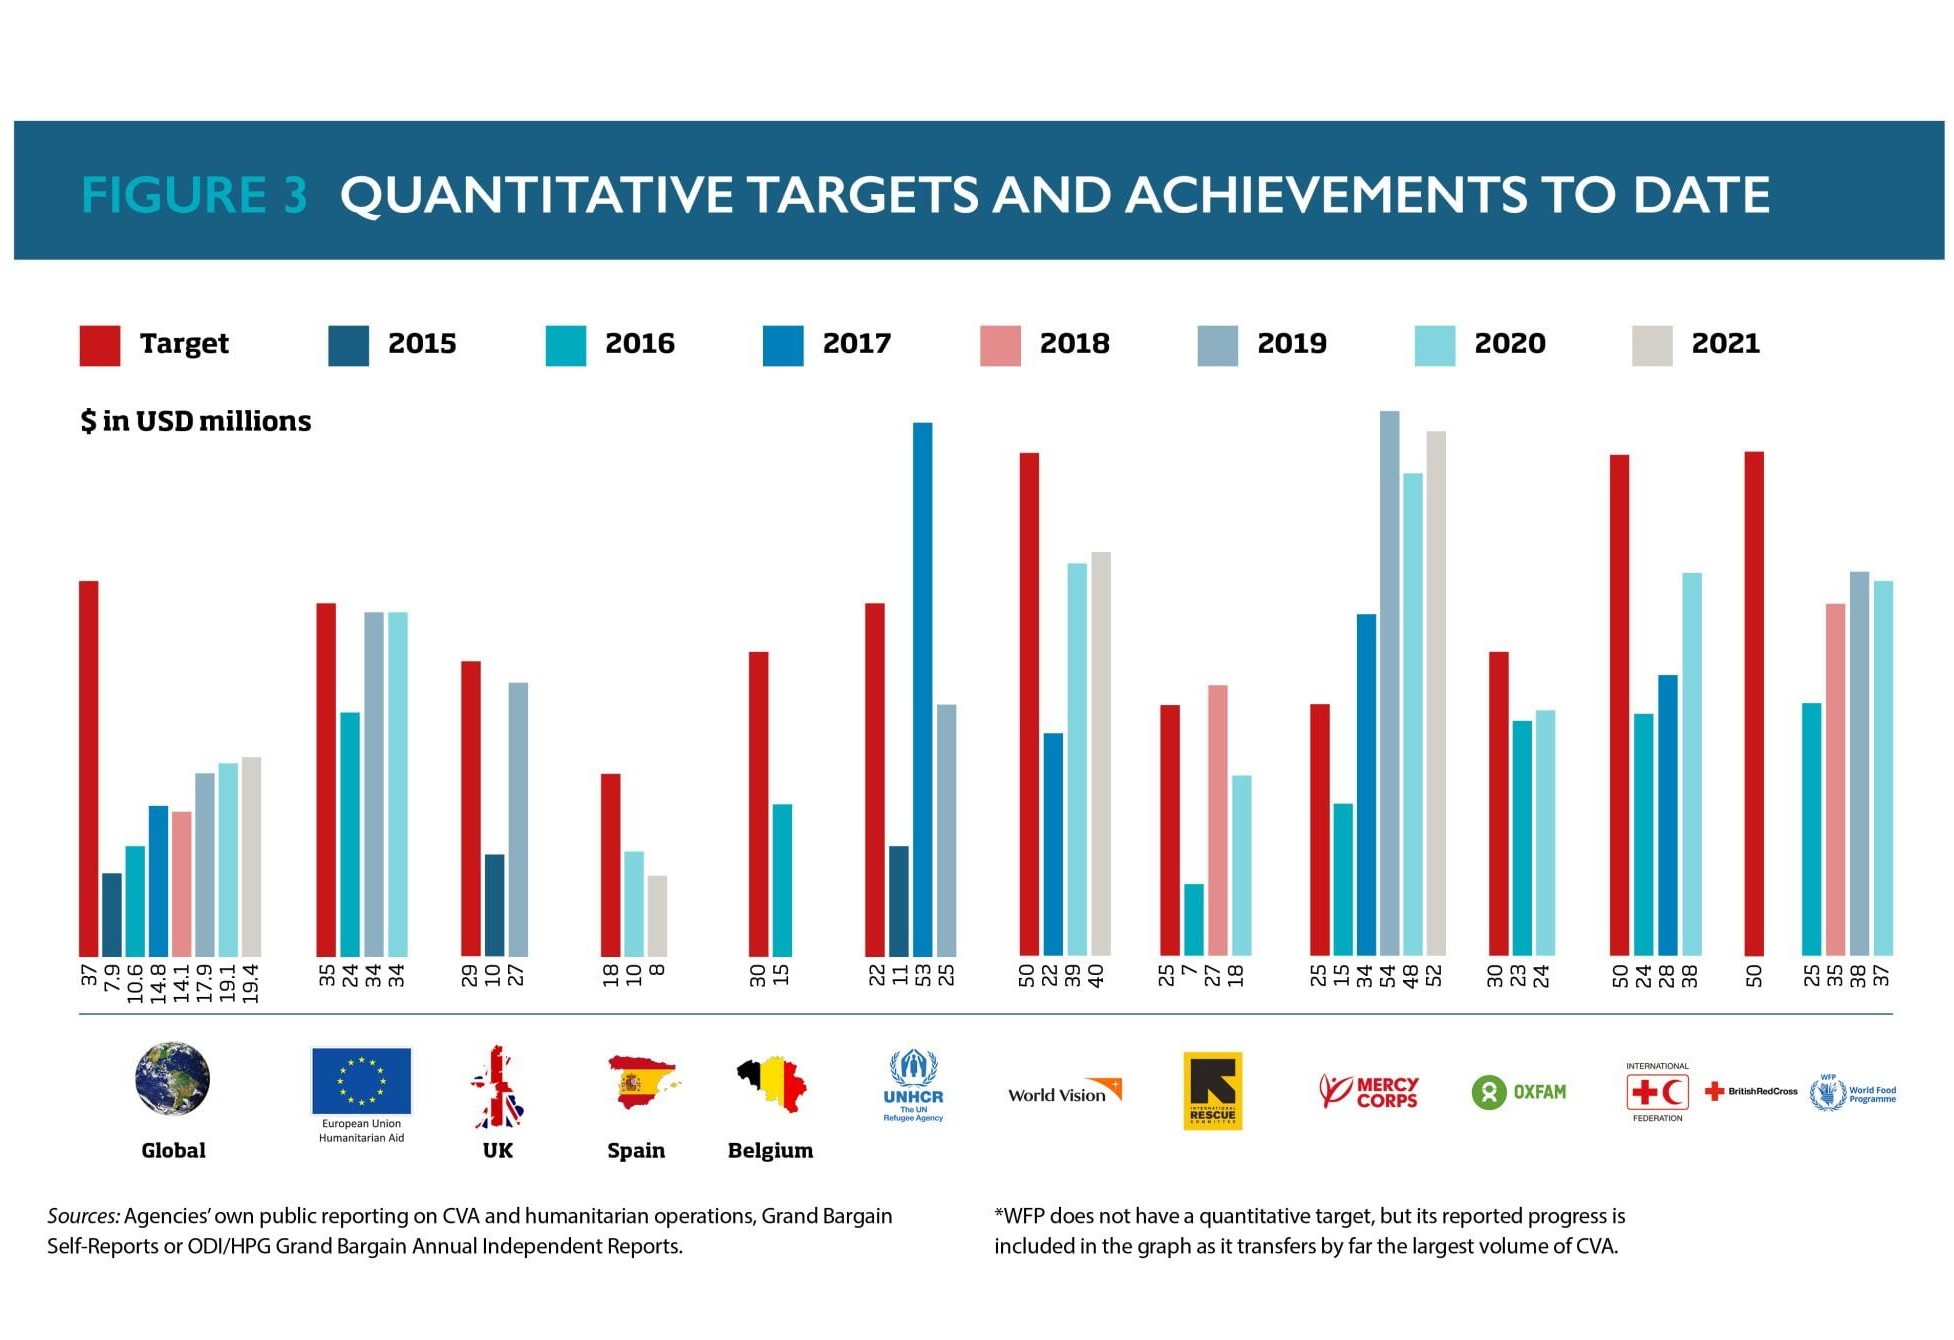 The bar graph titled “FIGURE 3 QUANTITATIVE TARGETS AND ACHIEVEMENTS TO DATE” illustrates financial targets and achievements from 2015 to 2021 in USD millions for various global organizations. The x-axis represents years, and the y-axis shows the financial values. Each year has two bars: one red for the target and one blue for the achievement. A note states that WFP’s progress is included despite not having a quantitative target .